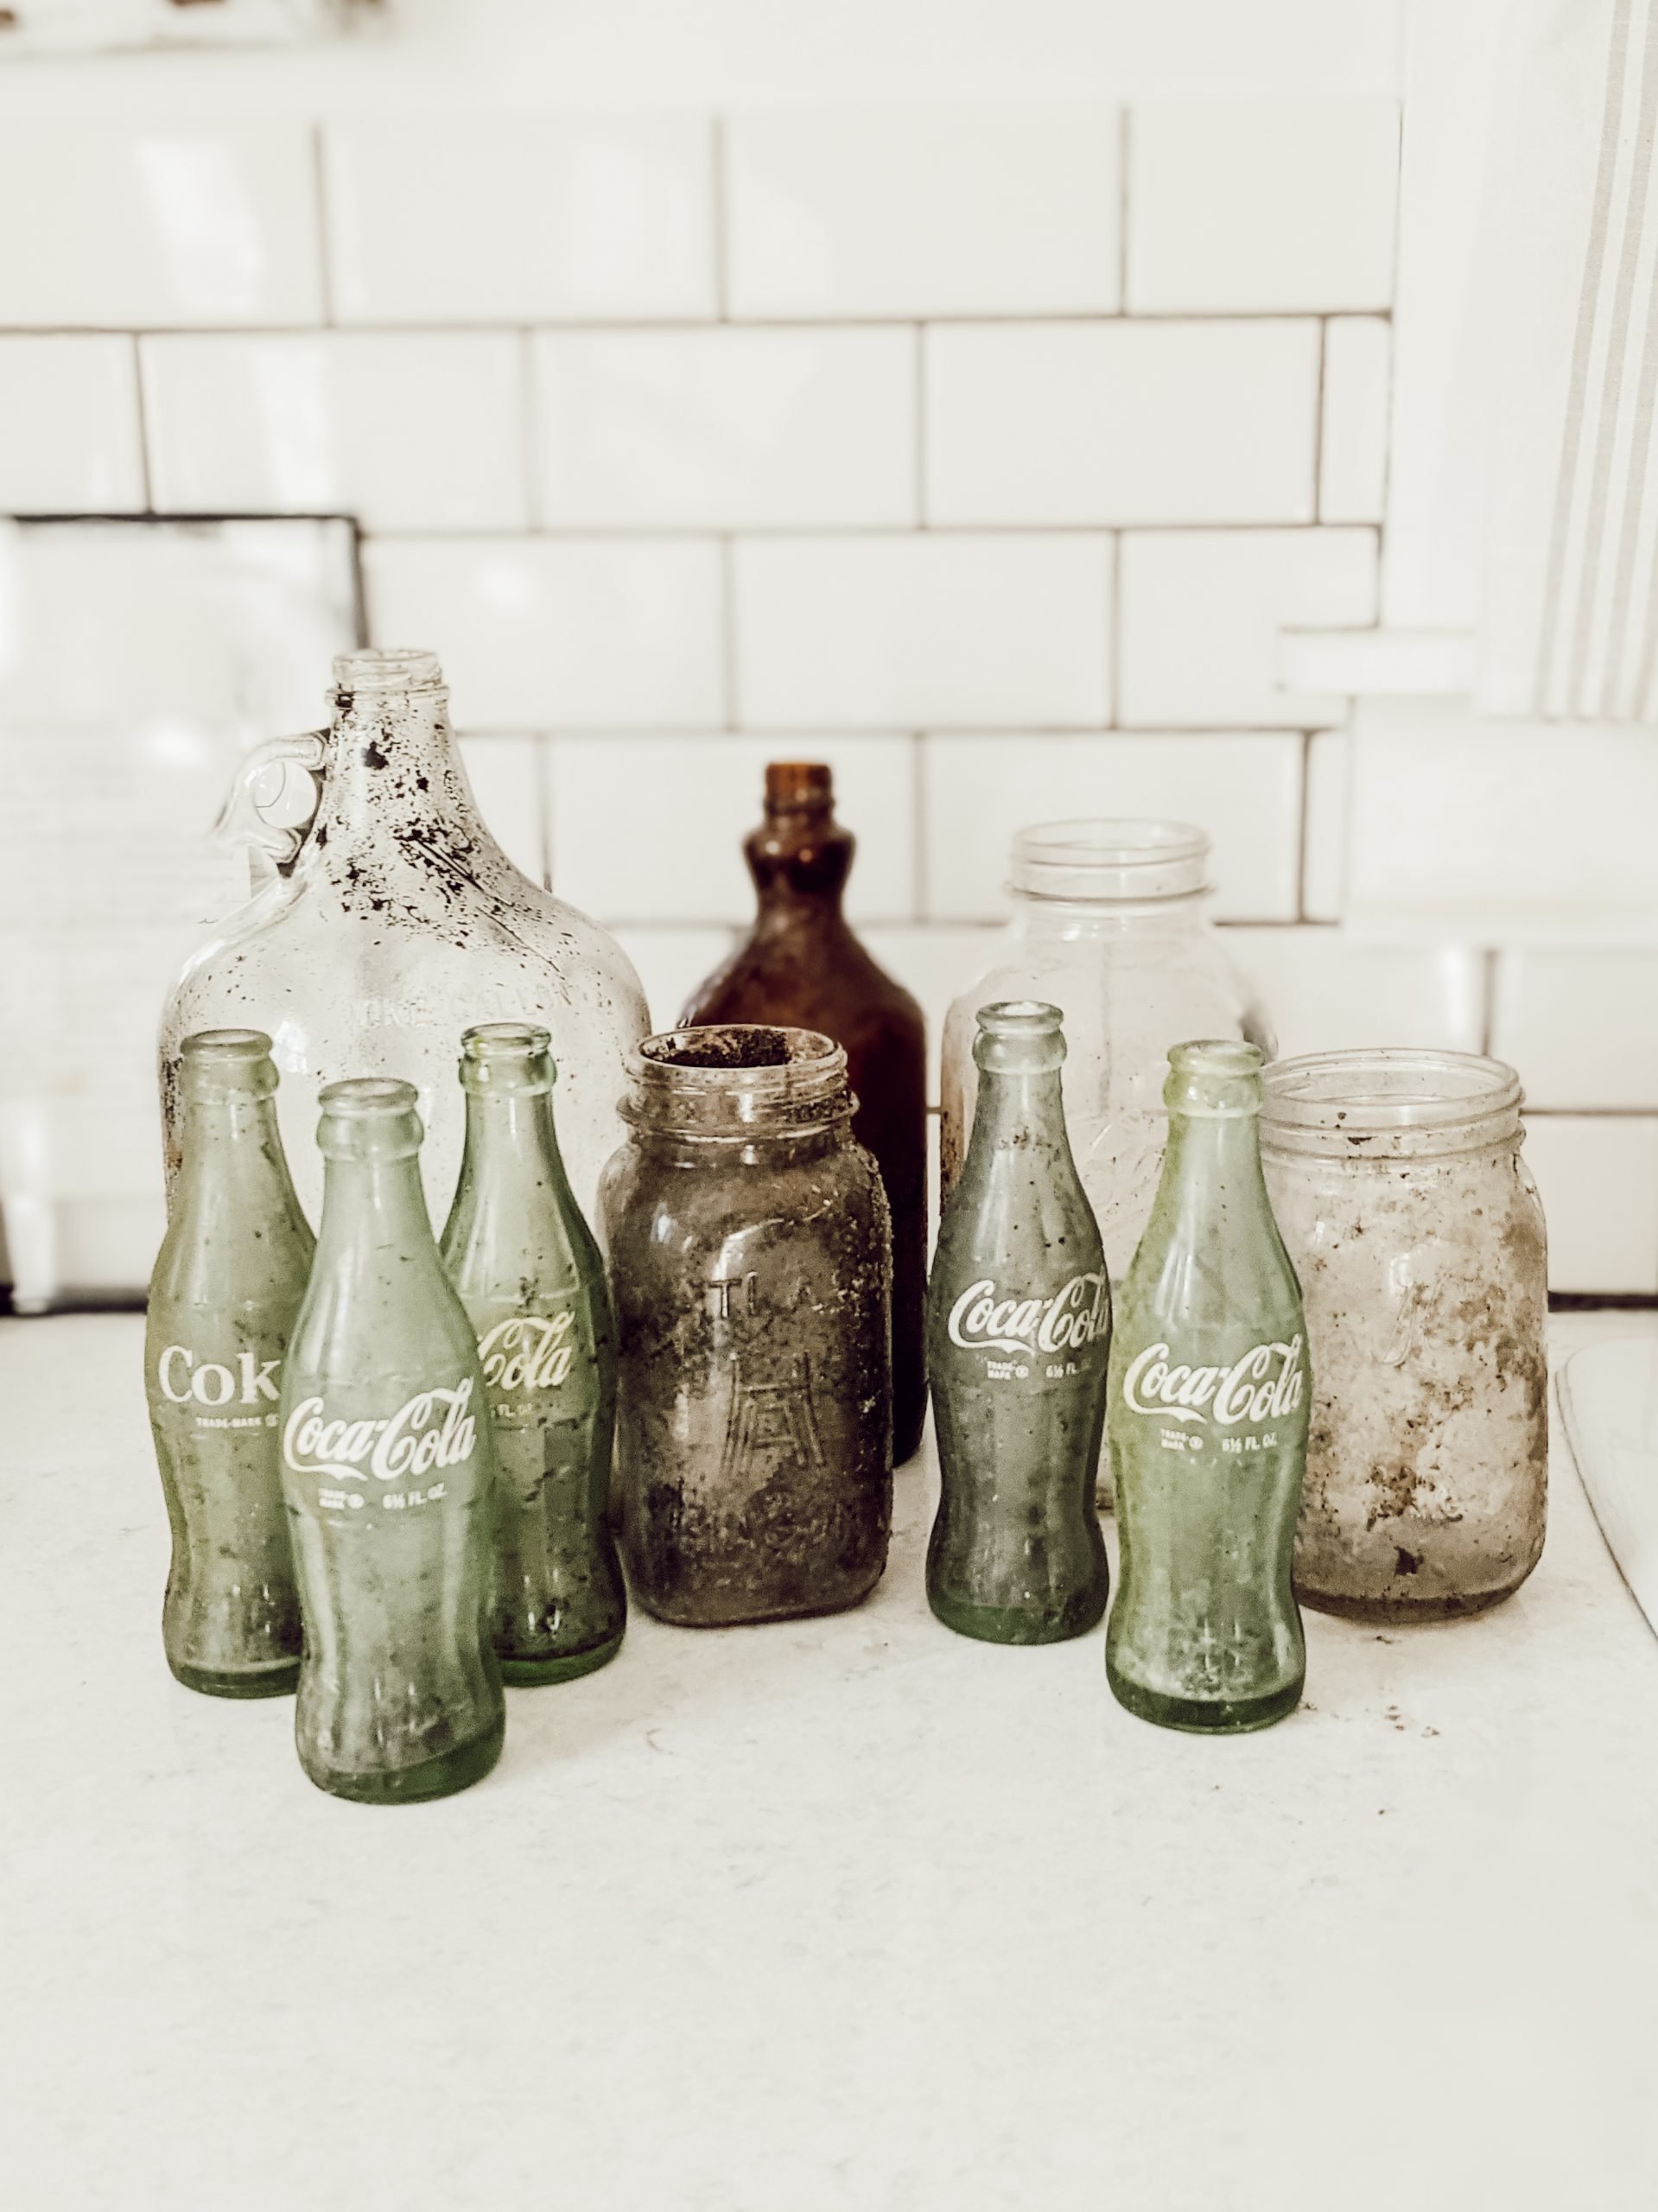 how to clean glass bottles like these dirty vintage glass bottles and jars